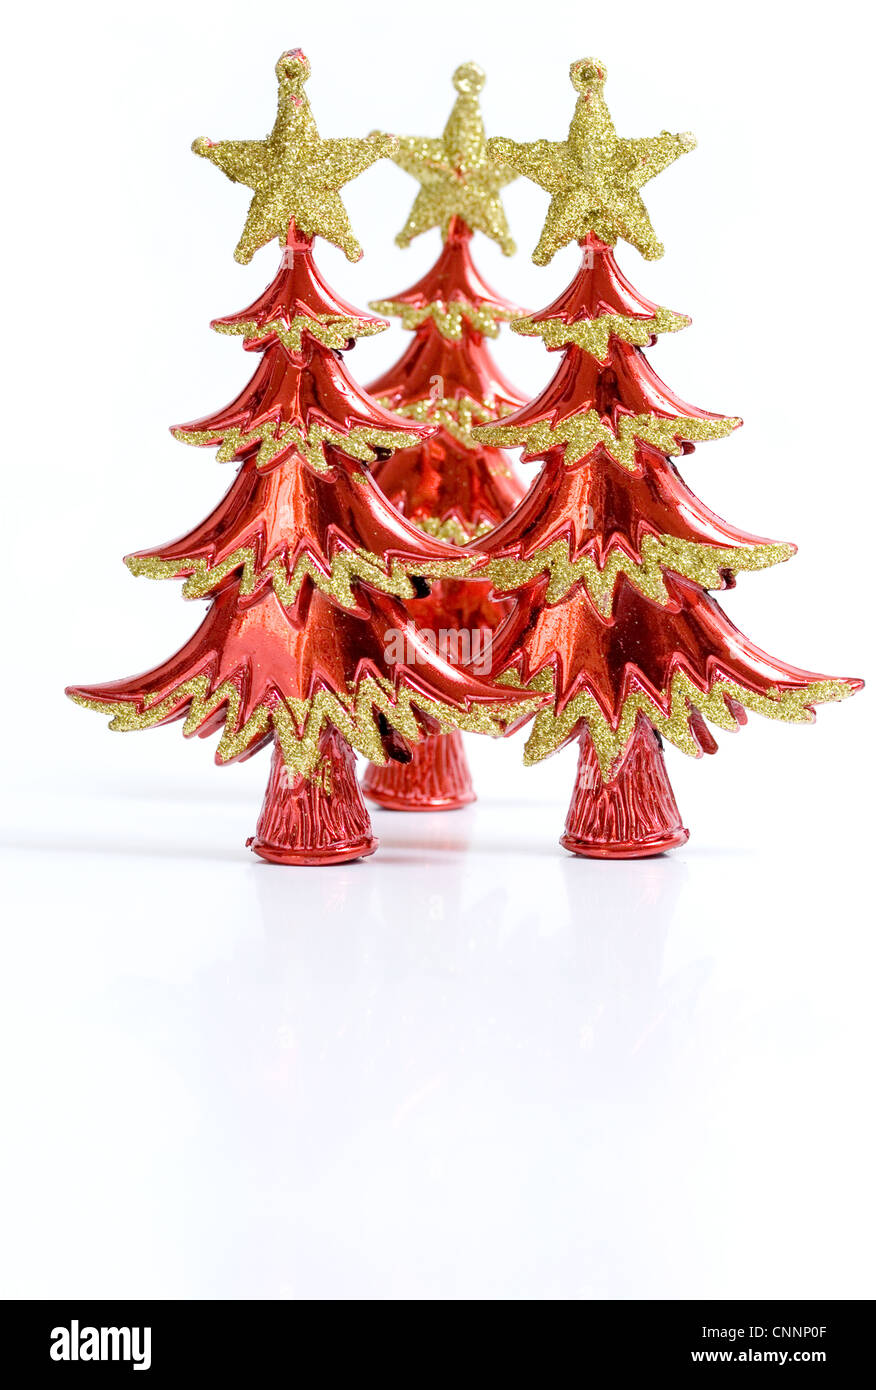 Three red and gold ornamental Christmas Tree cut outs. Stock Photo